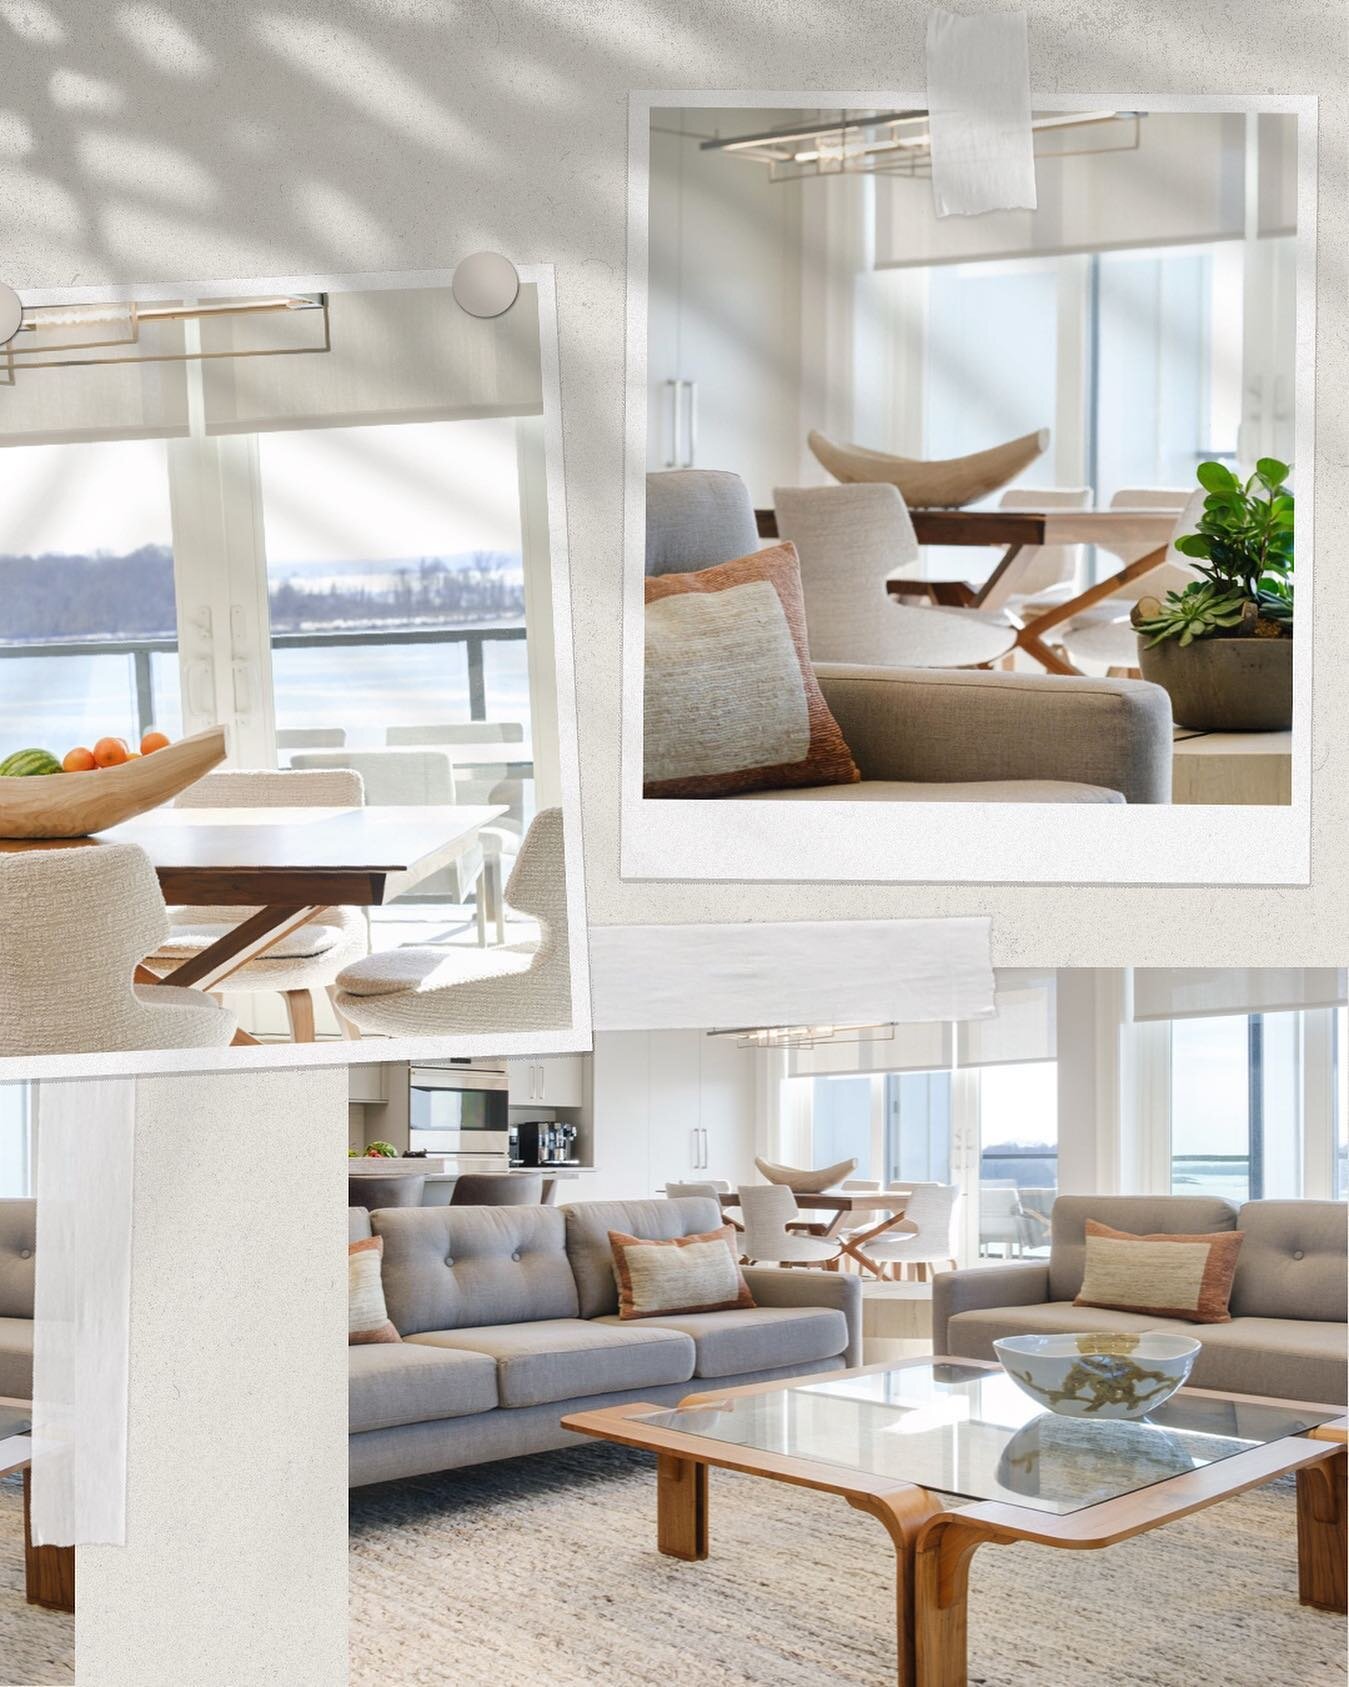 The opportunity to design an open floor plan is one that playfully invites mixing textures and shapes.
Here, the star is clearly the amazing view of the Long Island Sound - the furnishings are just the audience! #openfloorplan #spicehillinteriors #in